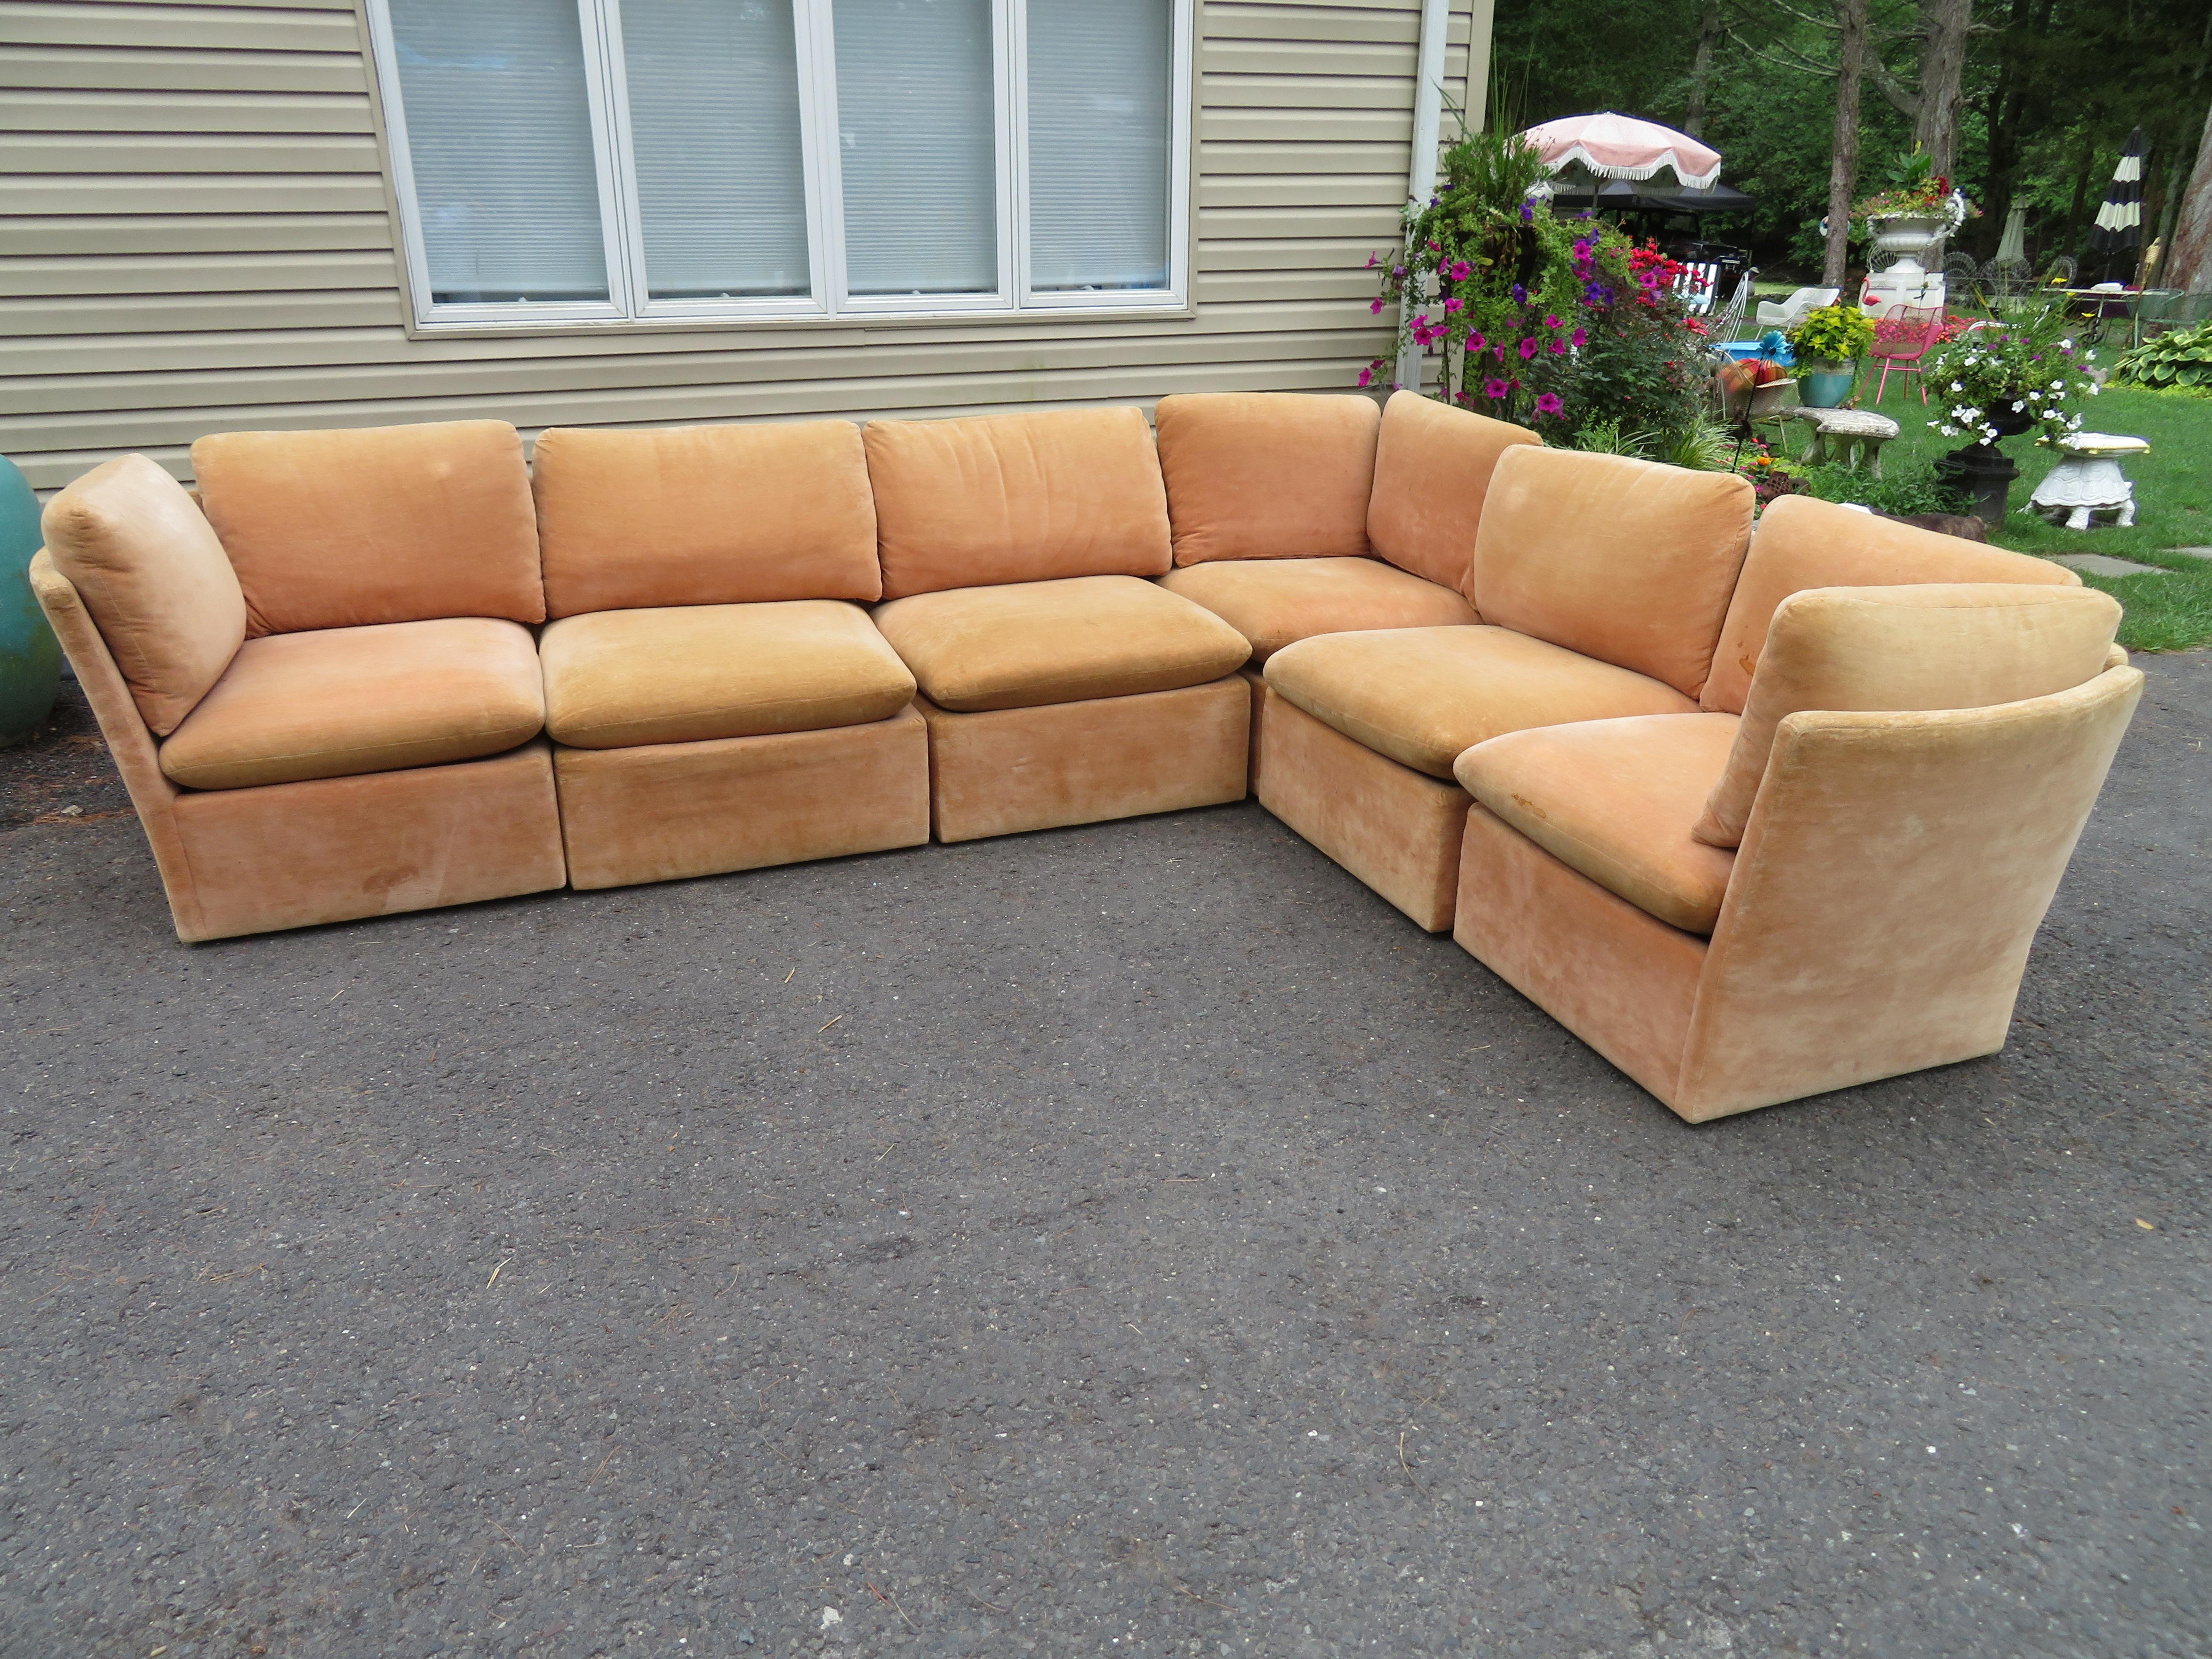 Unusual curved back 6-piece cube sectional sofa by Milo Baughman. We have had many many cube sofas by Mr Baughman but we have never seen this design with the curved back and the open arm detail. The original upholstery is worn and will need to be